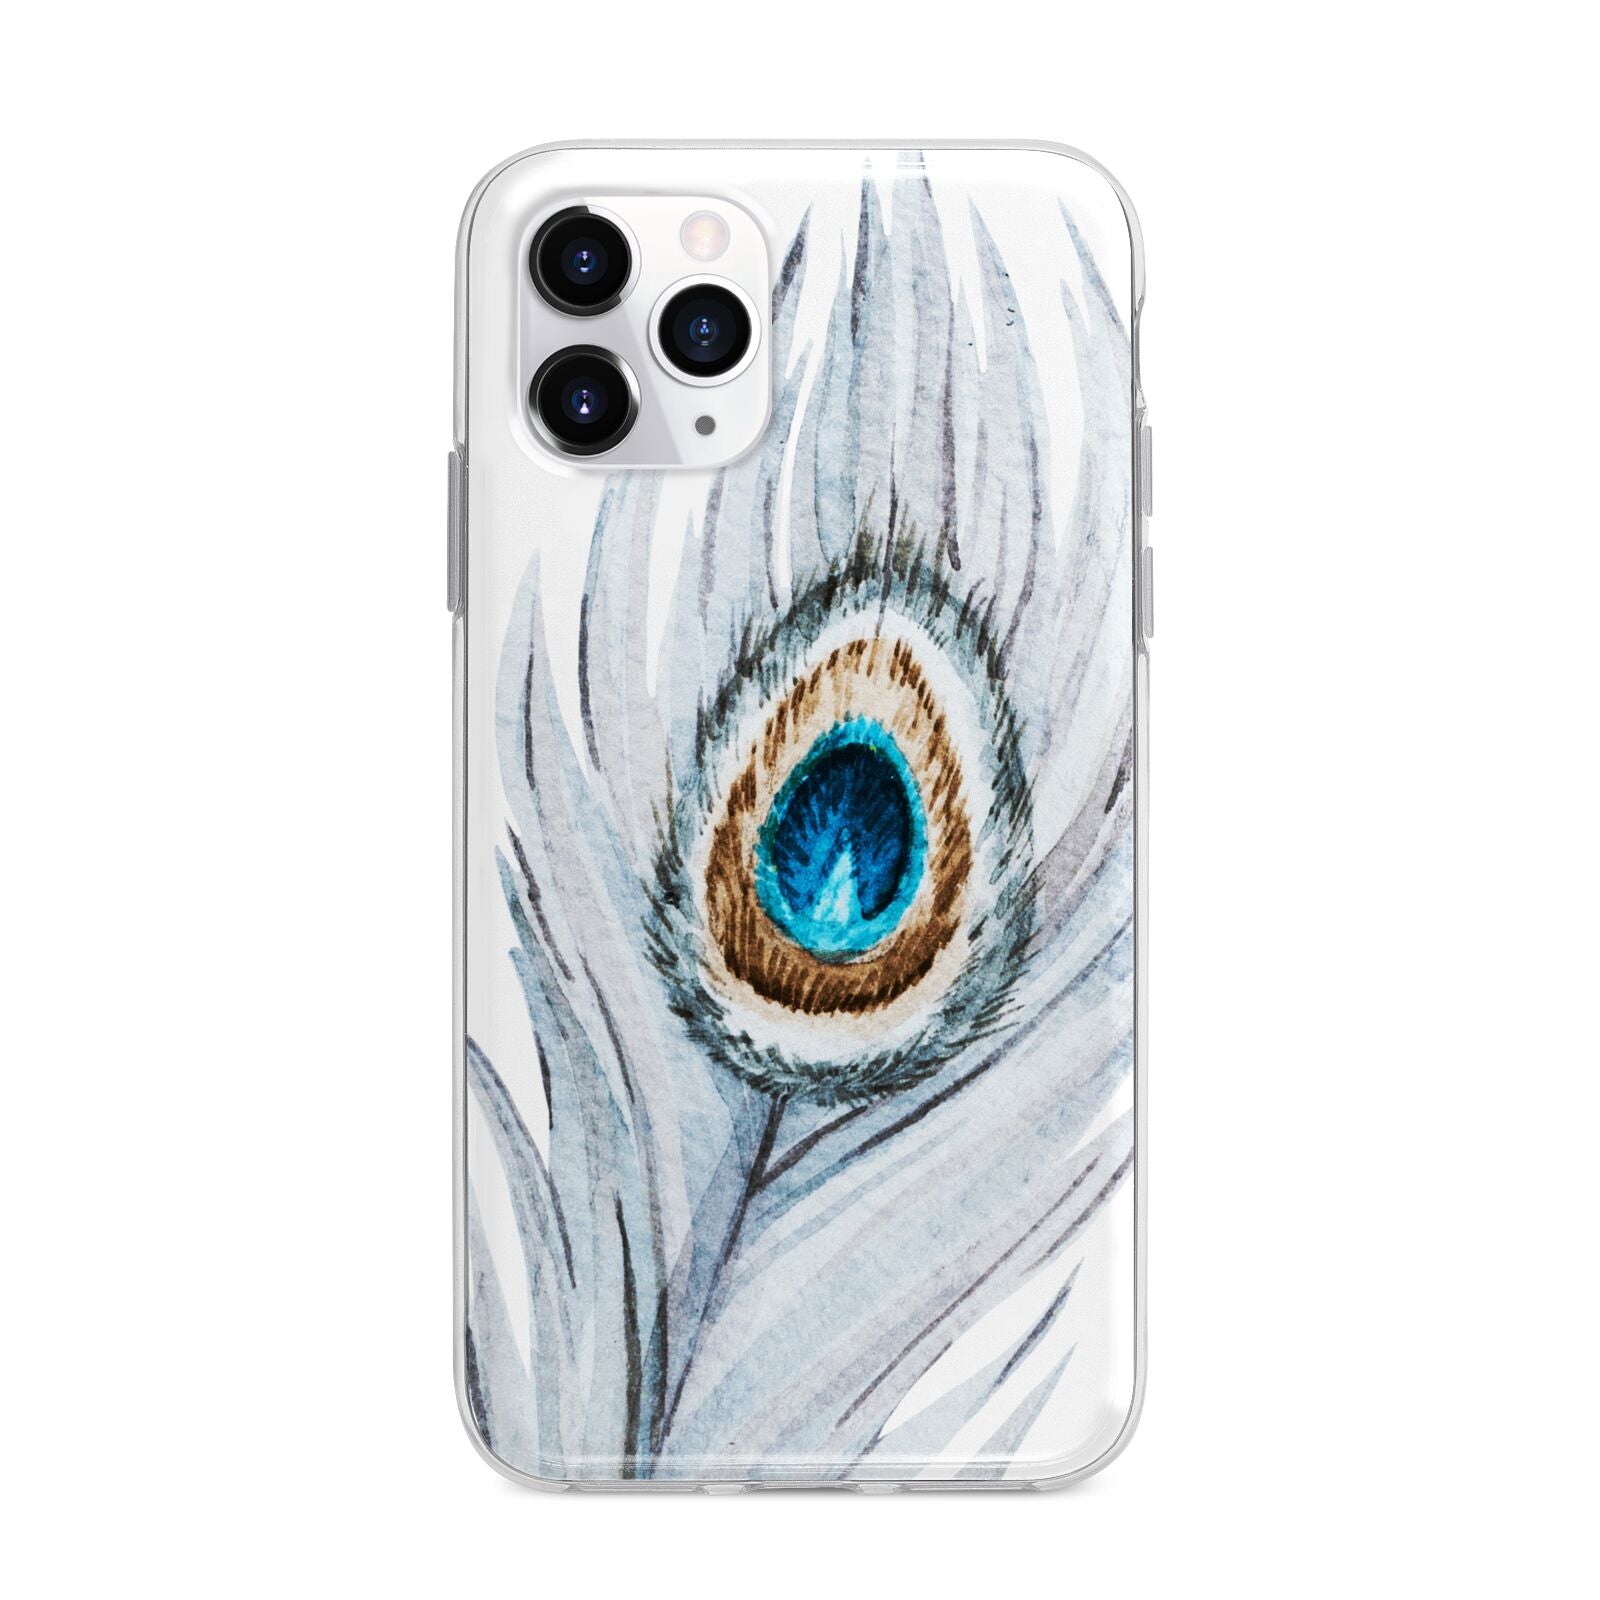 Peacock Apple iPhone 11 Pro Max in Silver with Bumper Case